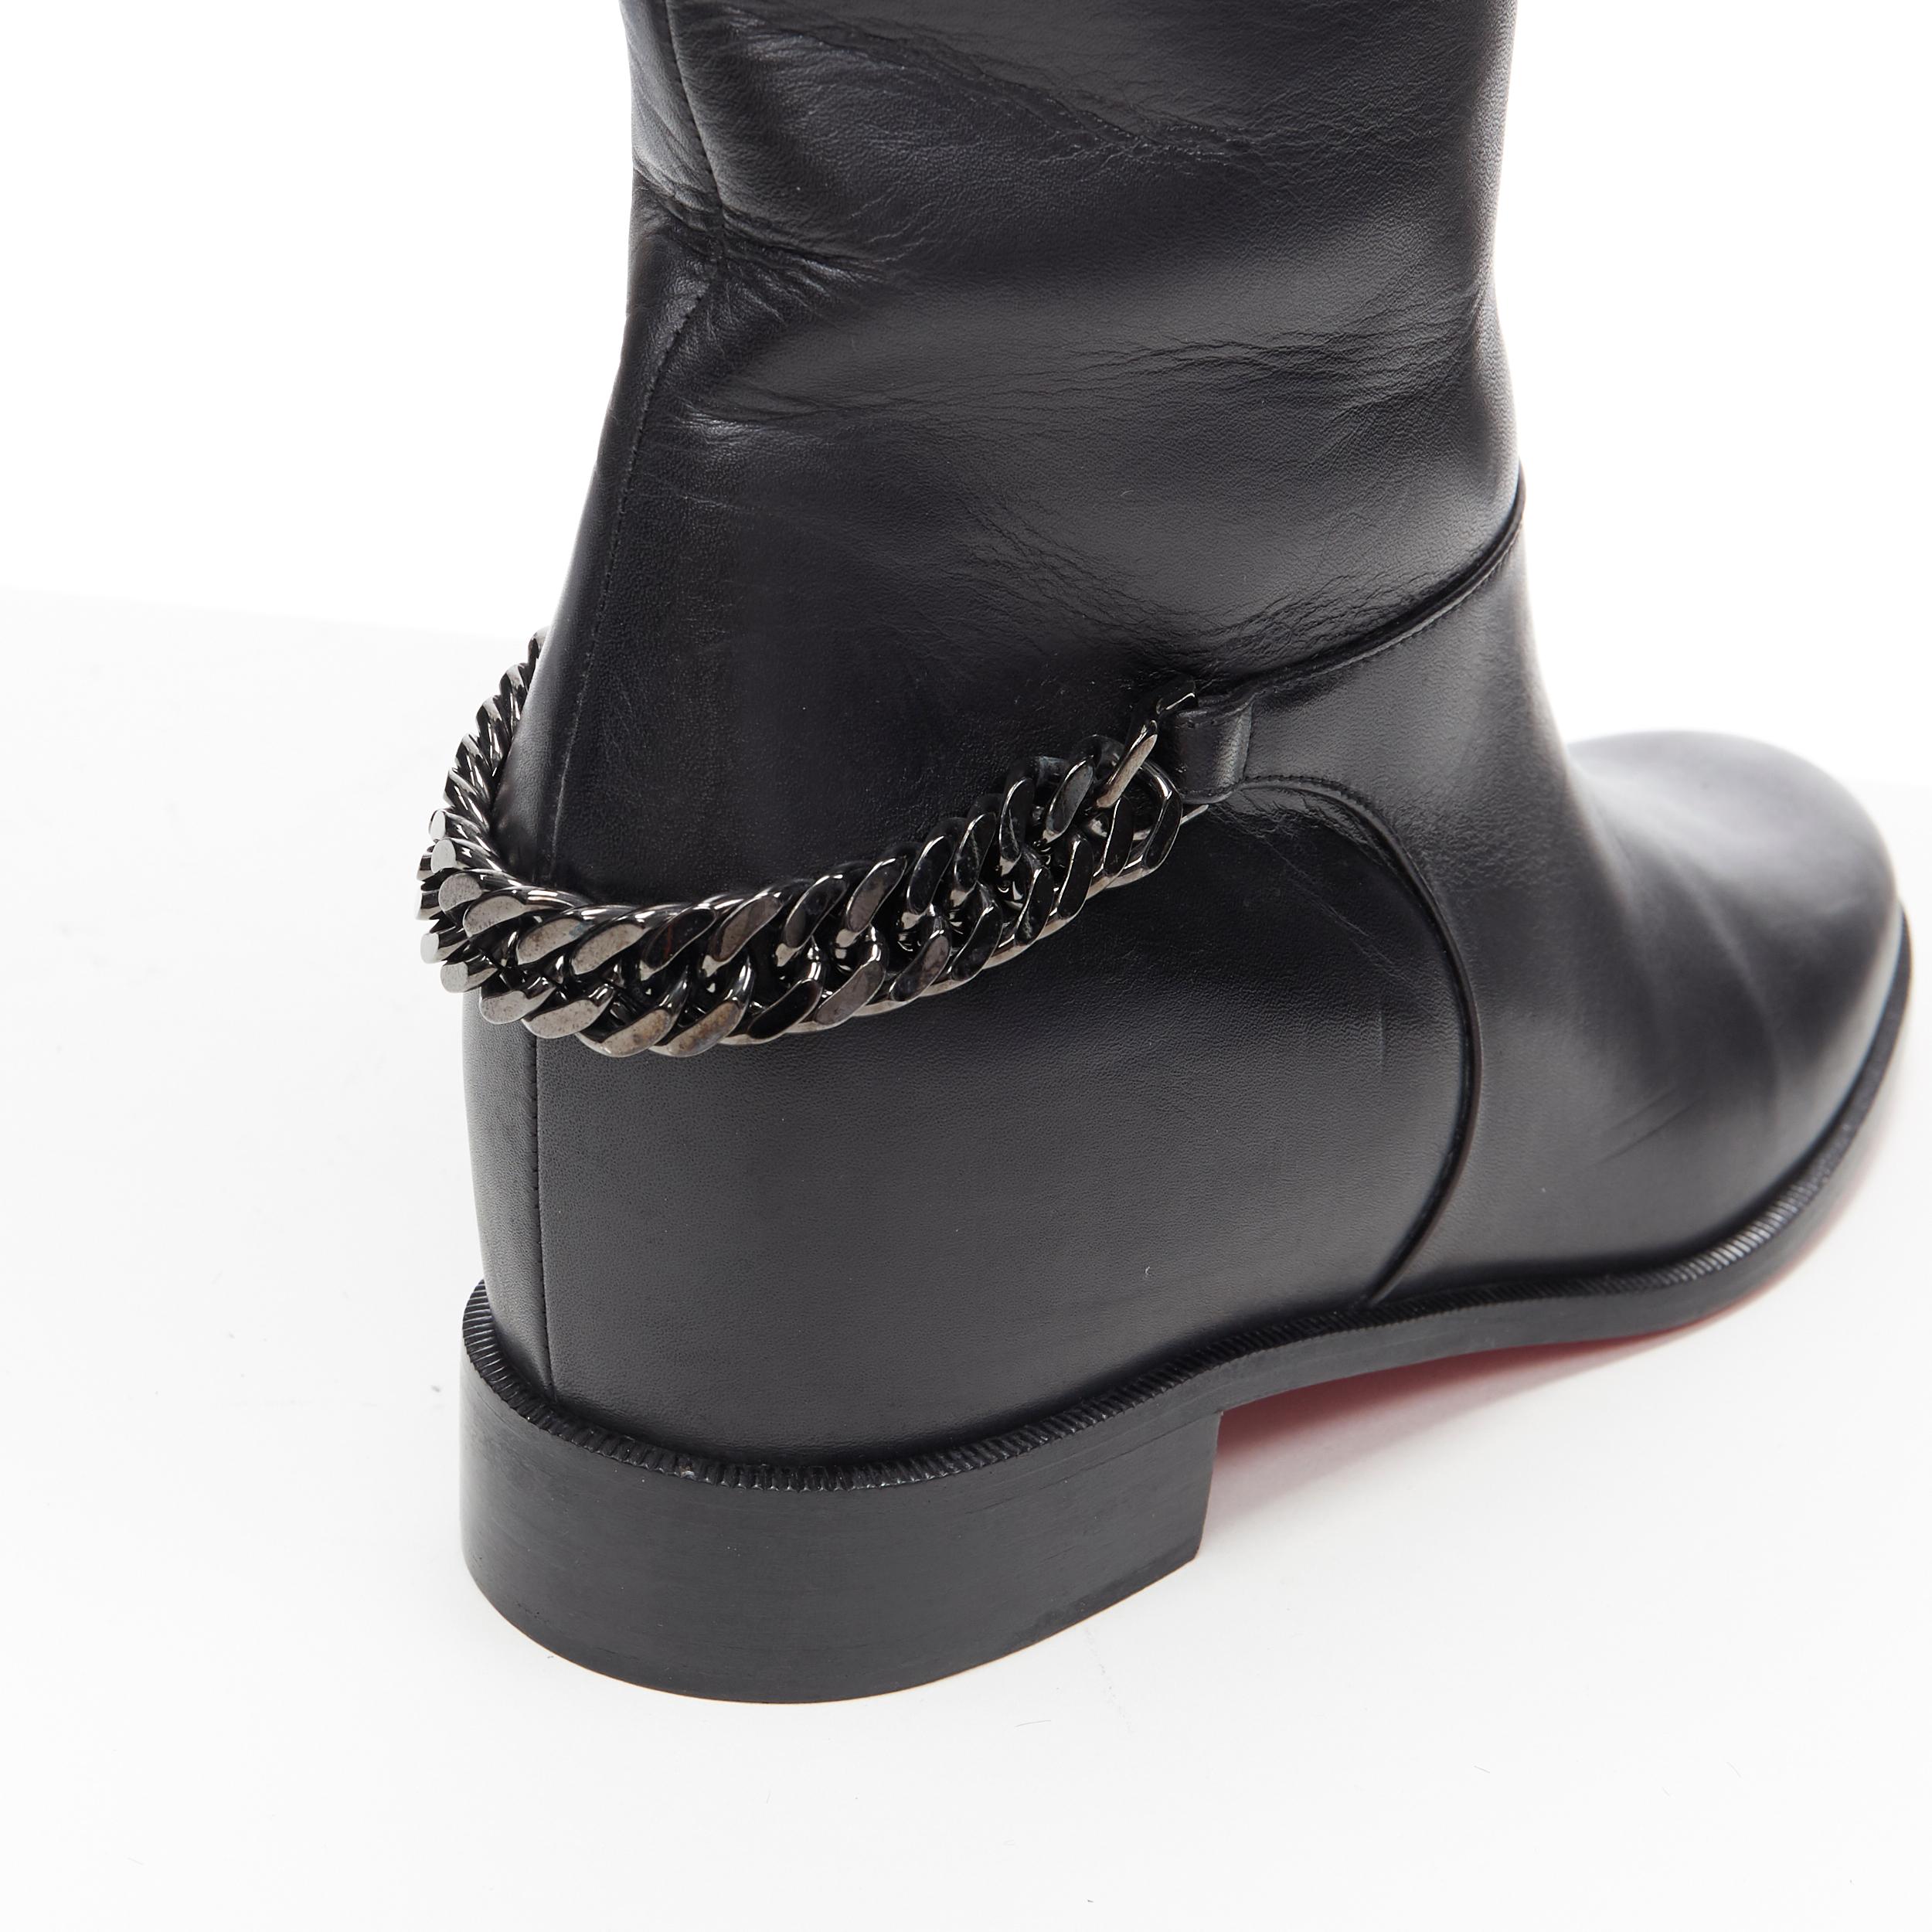 CHRISTIAN LOUBOUTIN Cate black chunky chain hel pull on flat riding boot EU39
Brand: Christian Louboutin
Designer: Christian Louboutin
Model Name / Style: Cate boot
Material: Leather
Color: Black
Pattern: Solid
Extra Detail: Cate boot. Tonal black